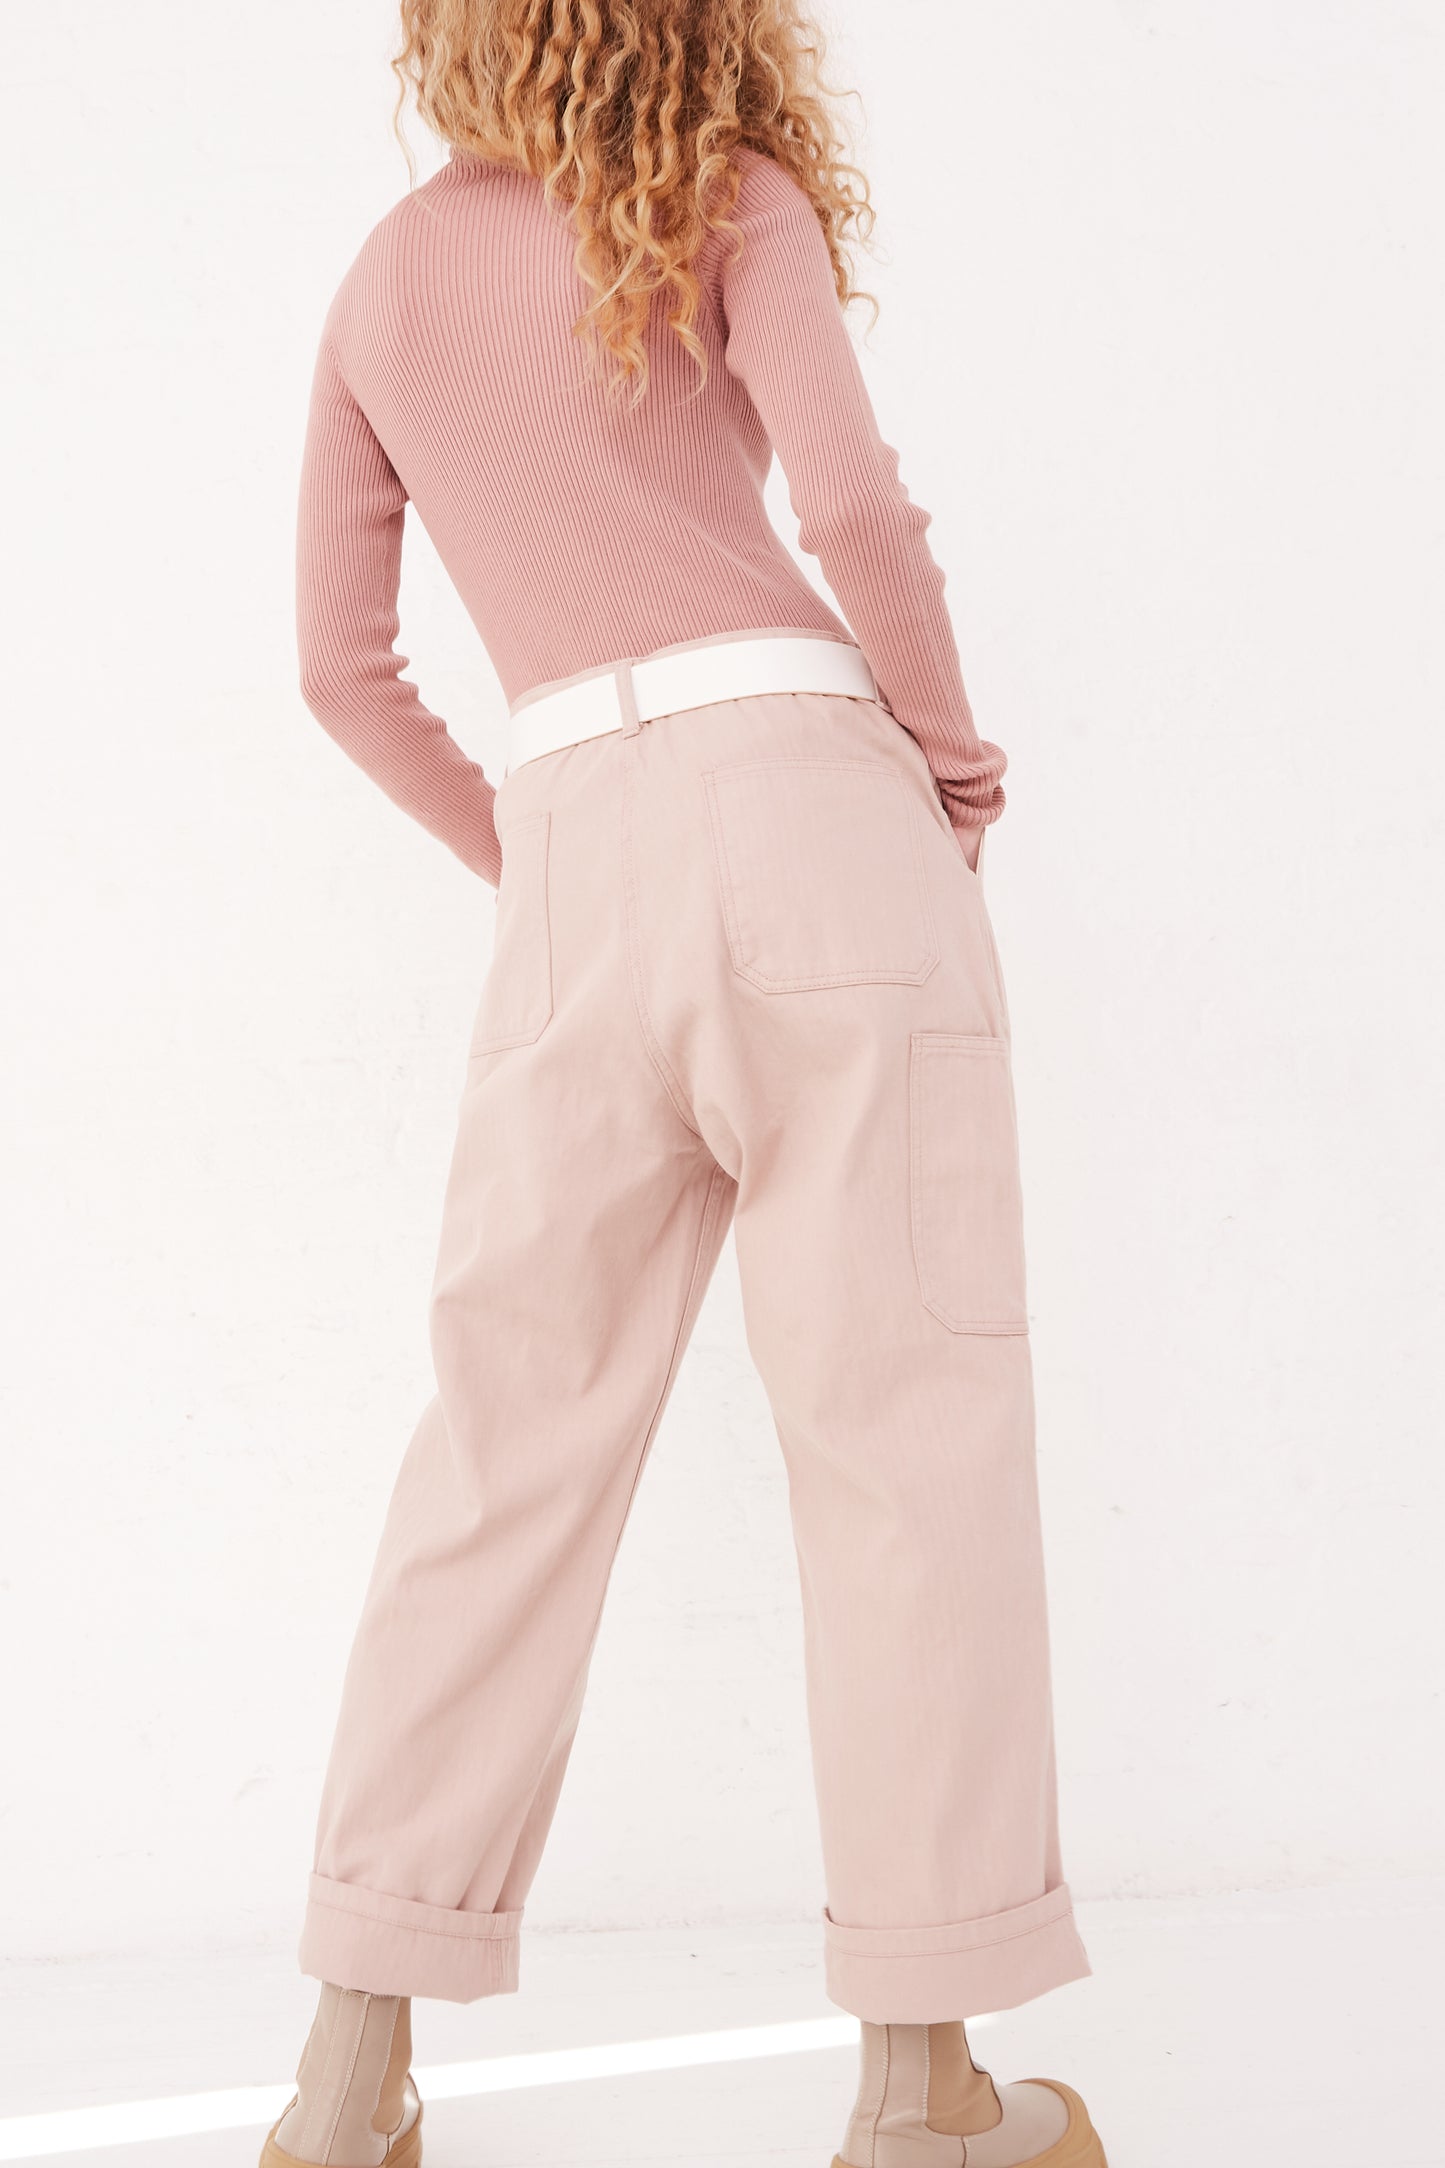 The back of a model wearing Ichi Antiquités Herringbone Pants in Pink, available at Oroboro store in NYC.